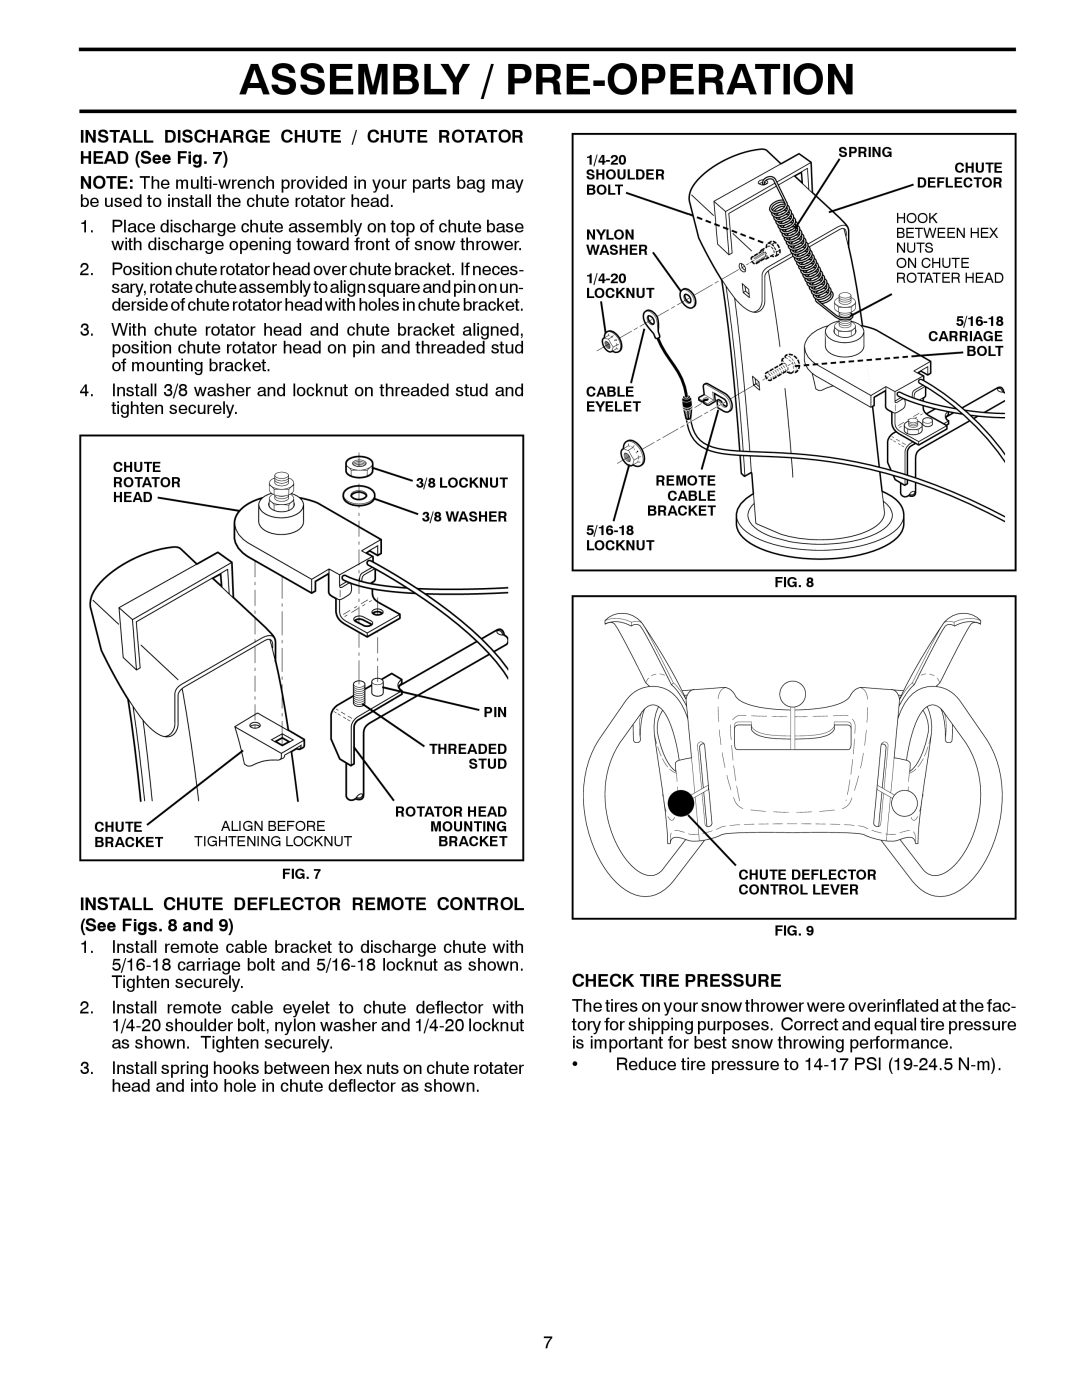 Poulan 961980022 Assembly / Pre-Operation, INSTALL DISCHARGE CHUTE / CHUTE ROTATOR HEAD See Fig, Check Tire Pressure 